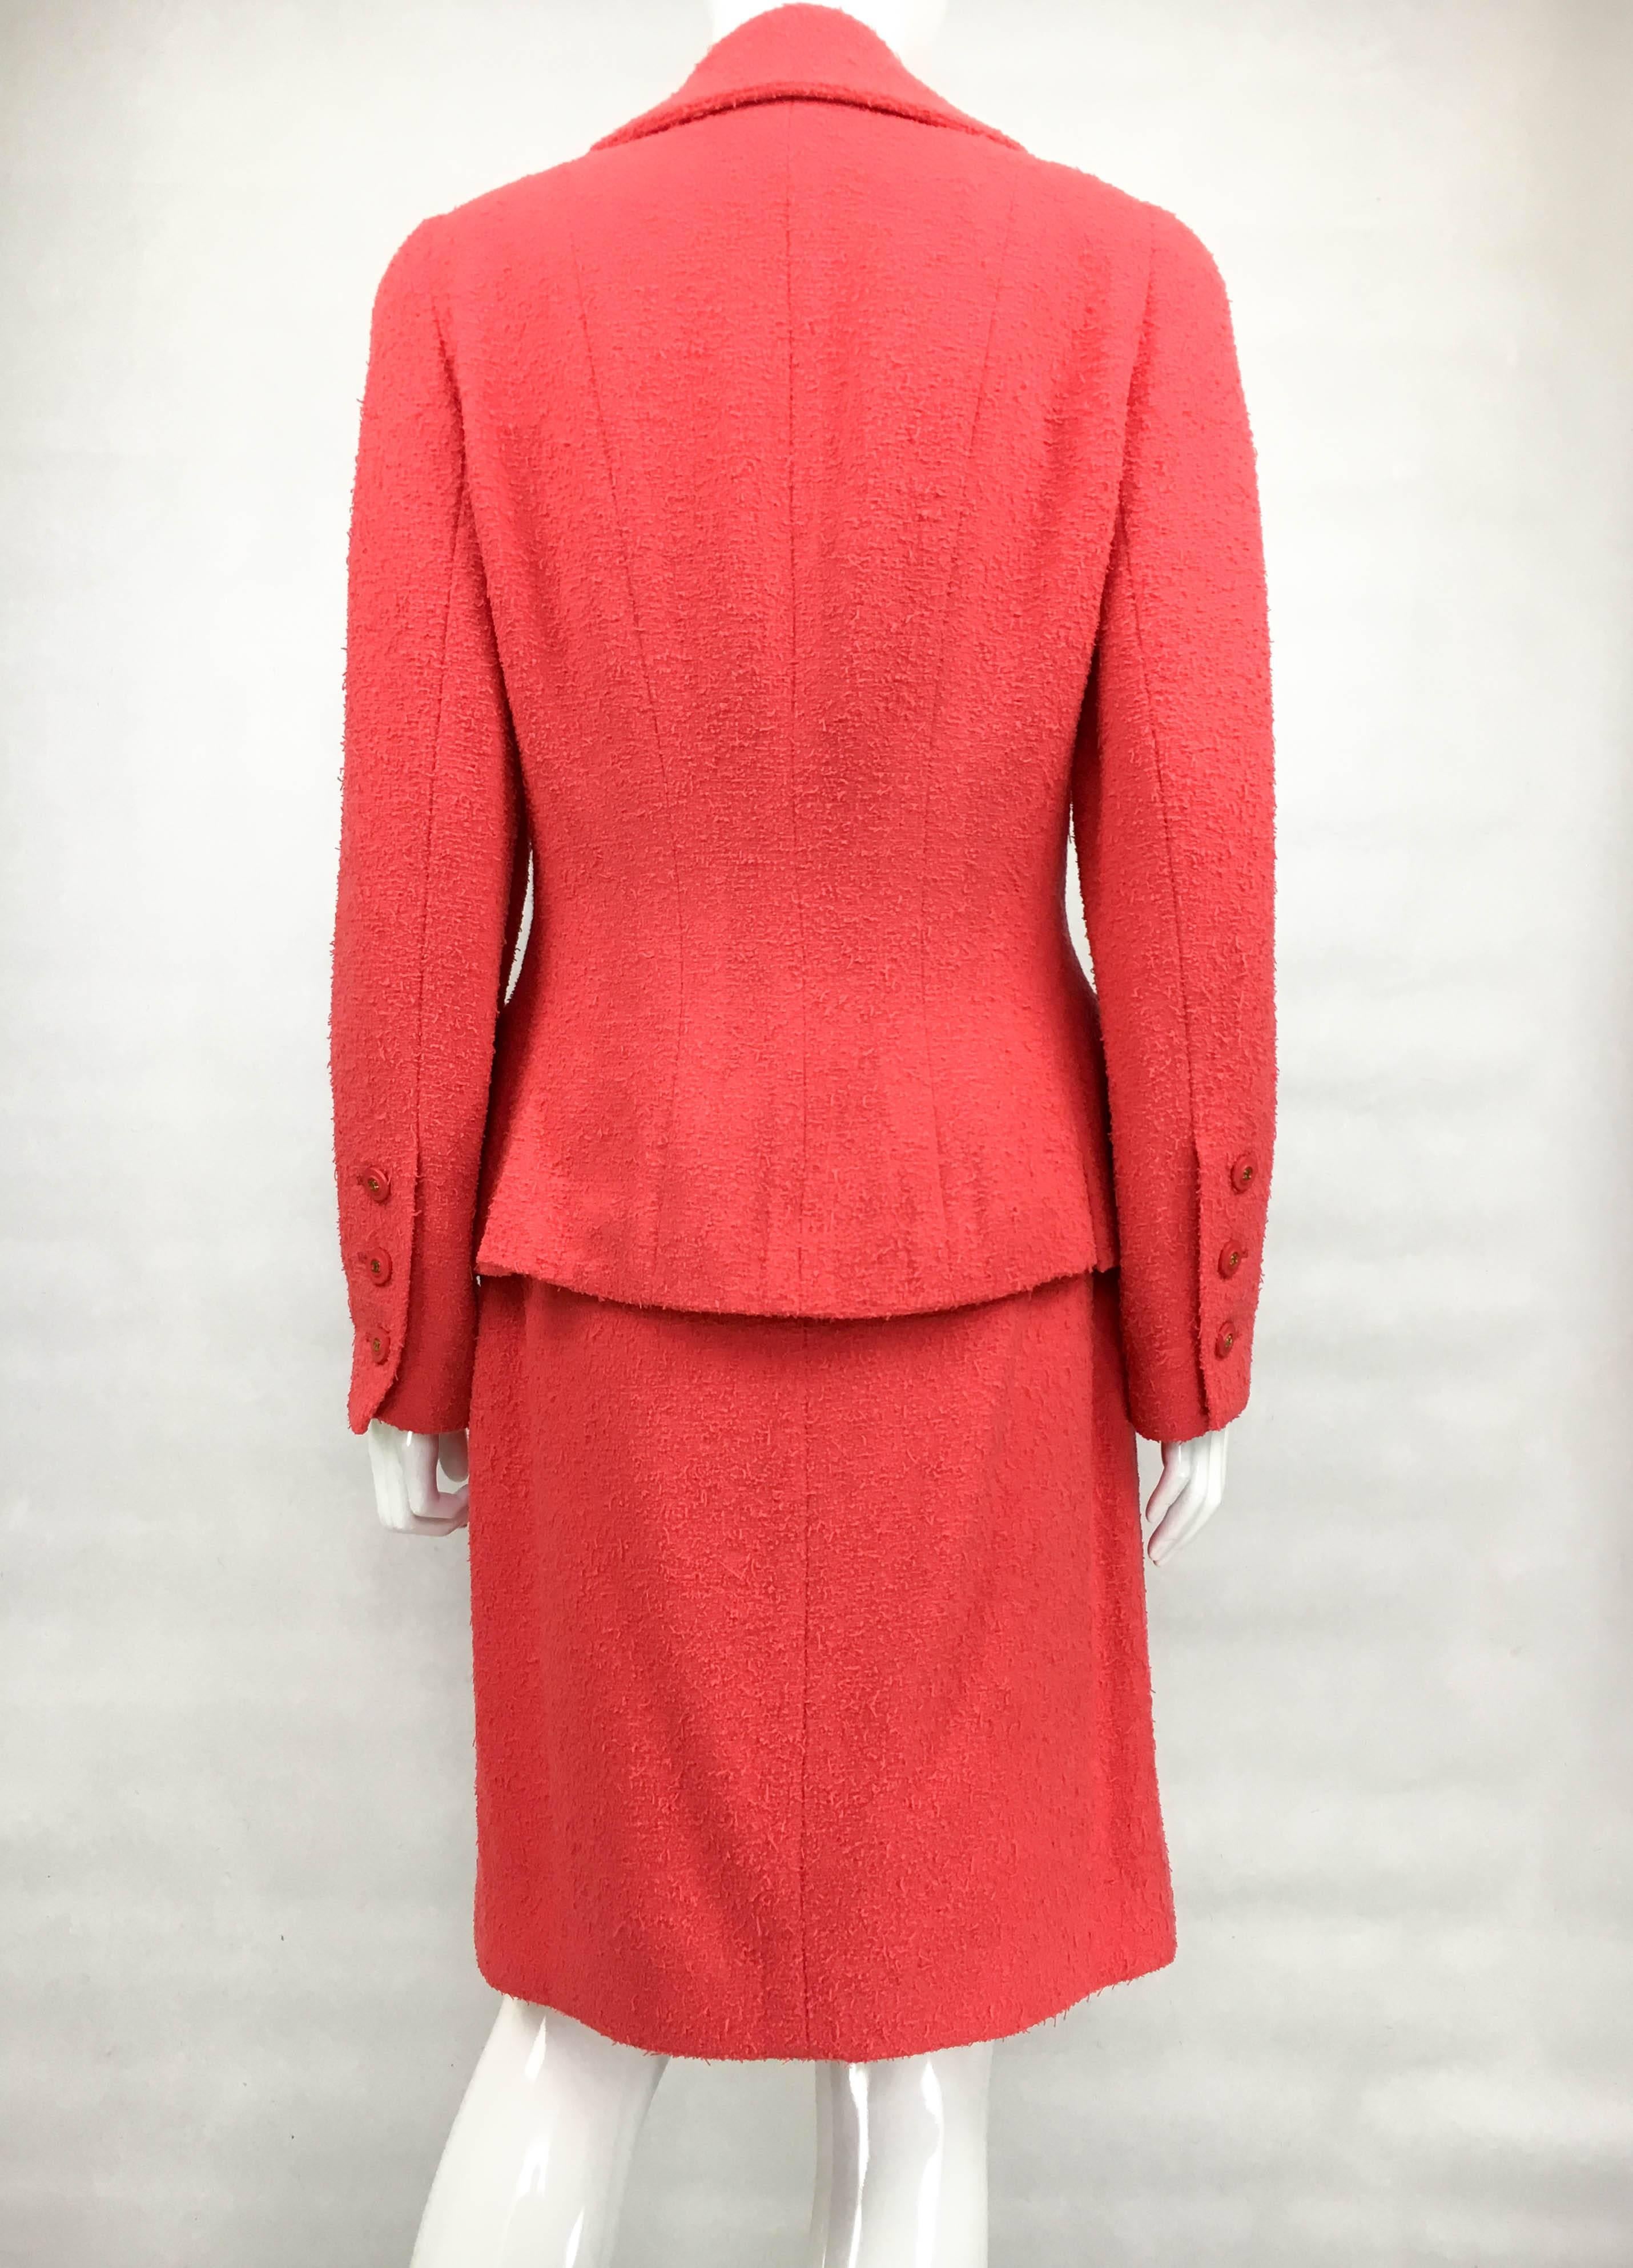 1994 Chanel Runway Look Hot Pink Bouclé Wool Skirt Suit In Excellent Condition For Sale In London, Chelsea